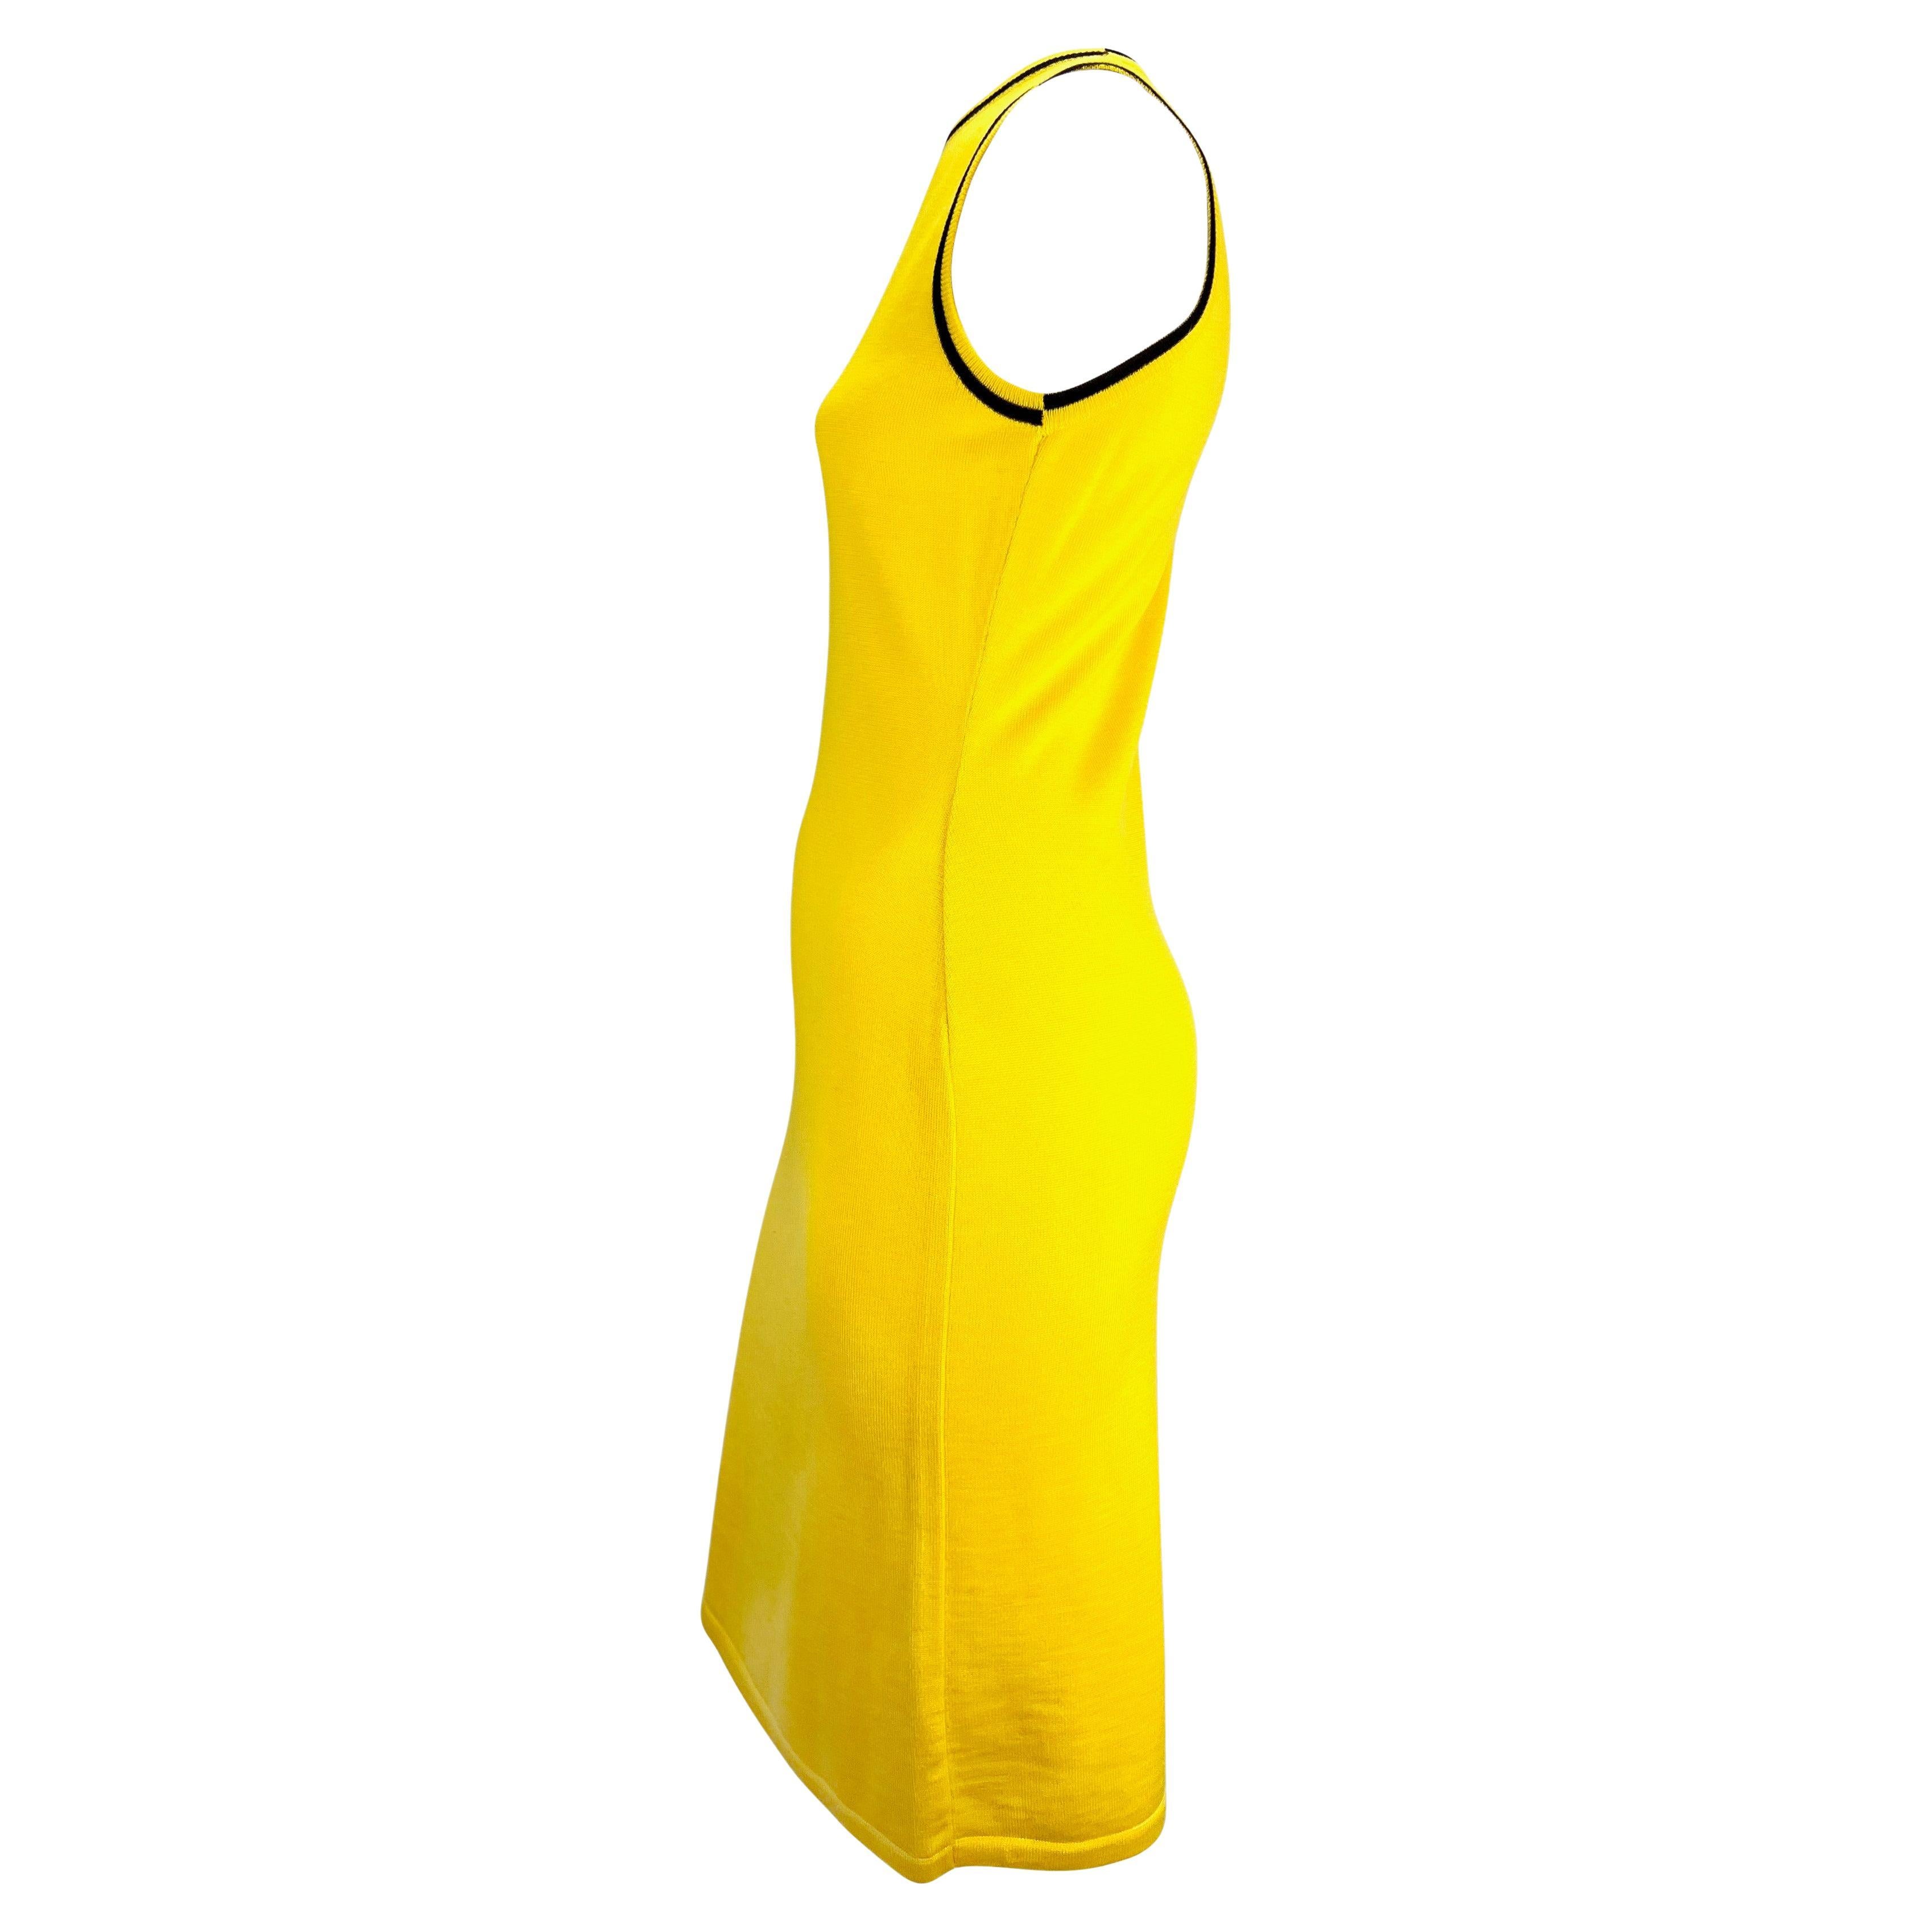 Presenting a canary yellow knit Gianni Versace sleeveless dress. From the late 1990s, this elegant and form-fitting dress is constructed entirely of knit wool and features a black stripe around the neckline and armholes. Effortlessly classy, this